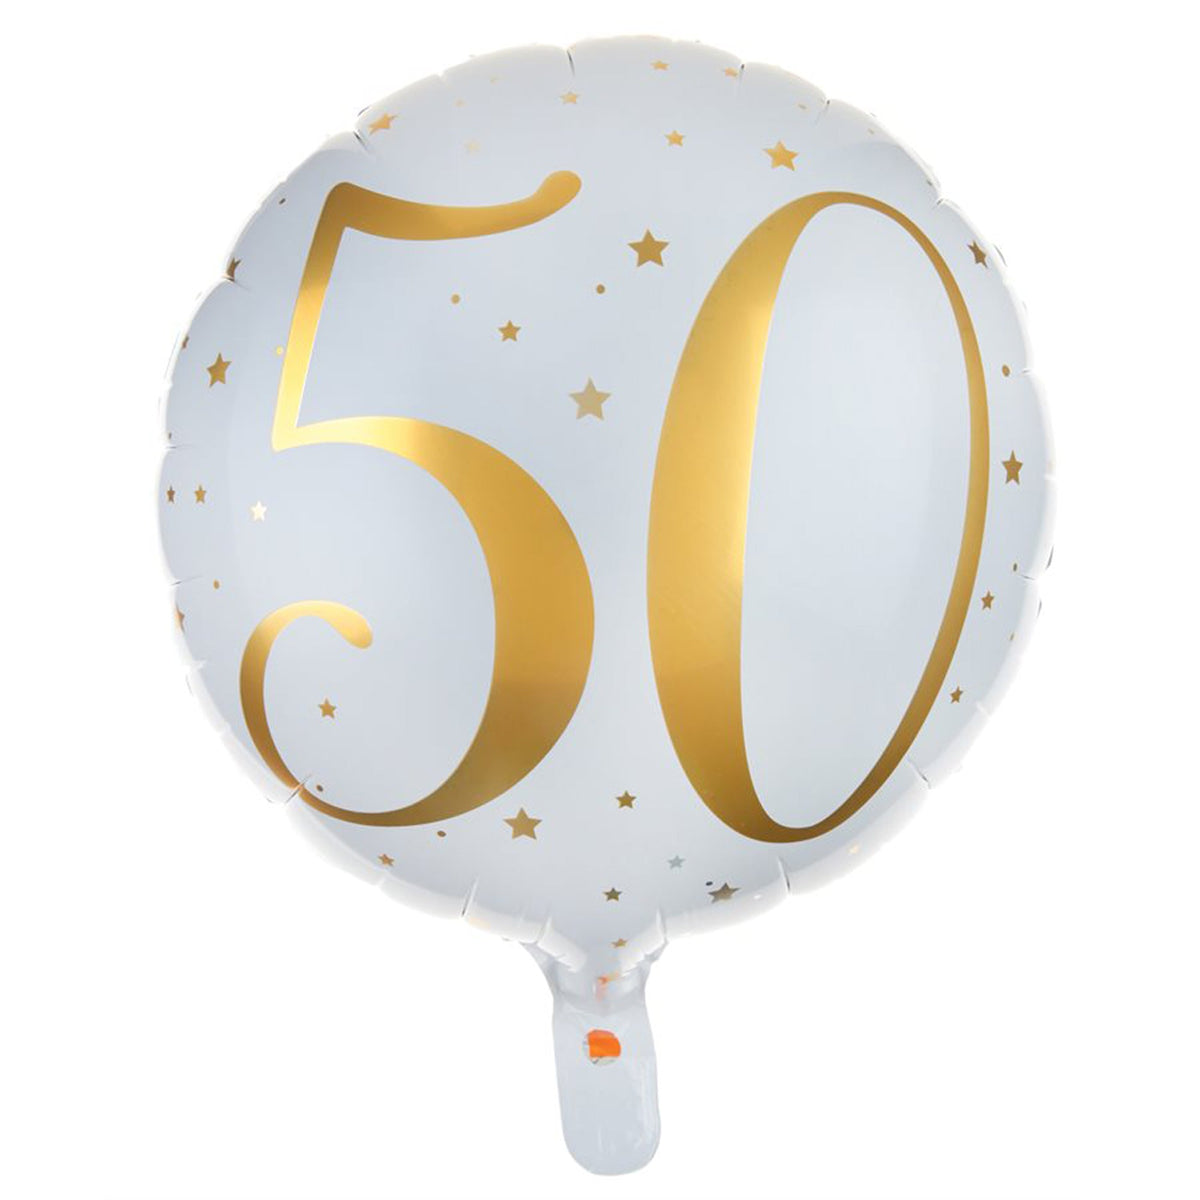 LE GROUPE BLC INTL INC Balloons Gold Trendy Age 50th Birthday Foil Balloon, 18 Inches, 1 Count 3660380045052